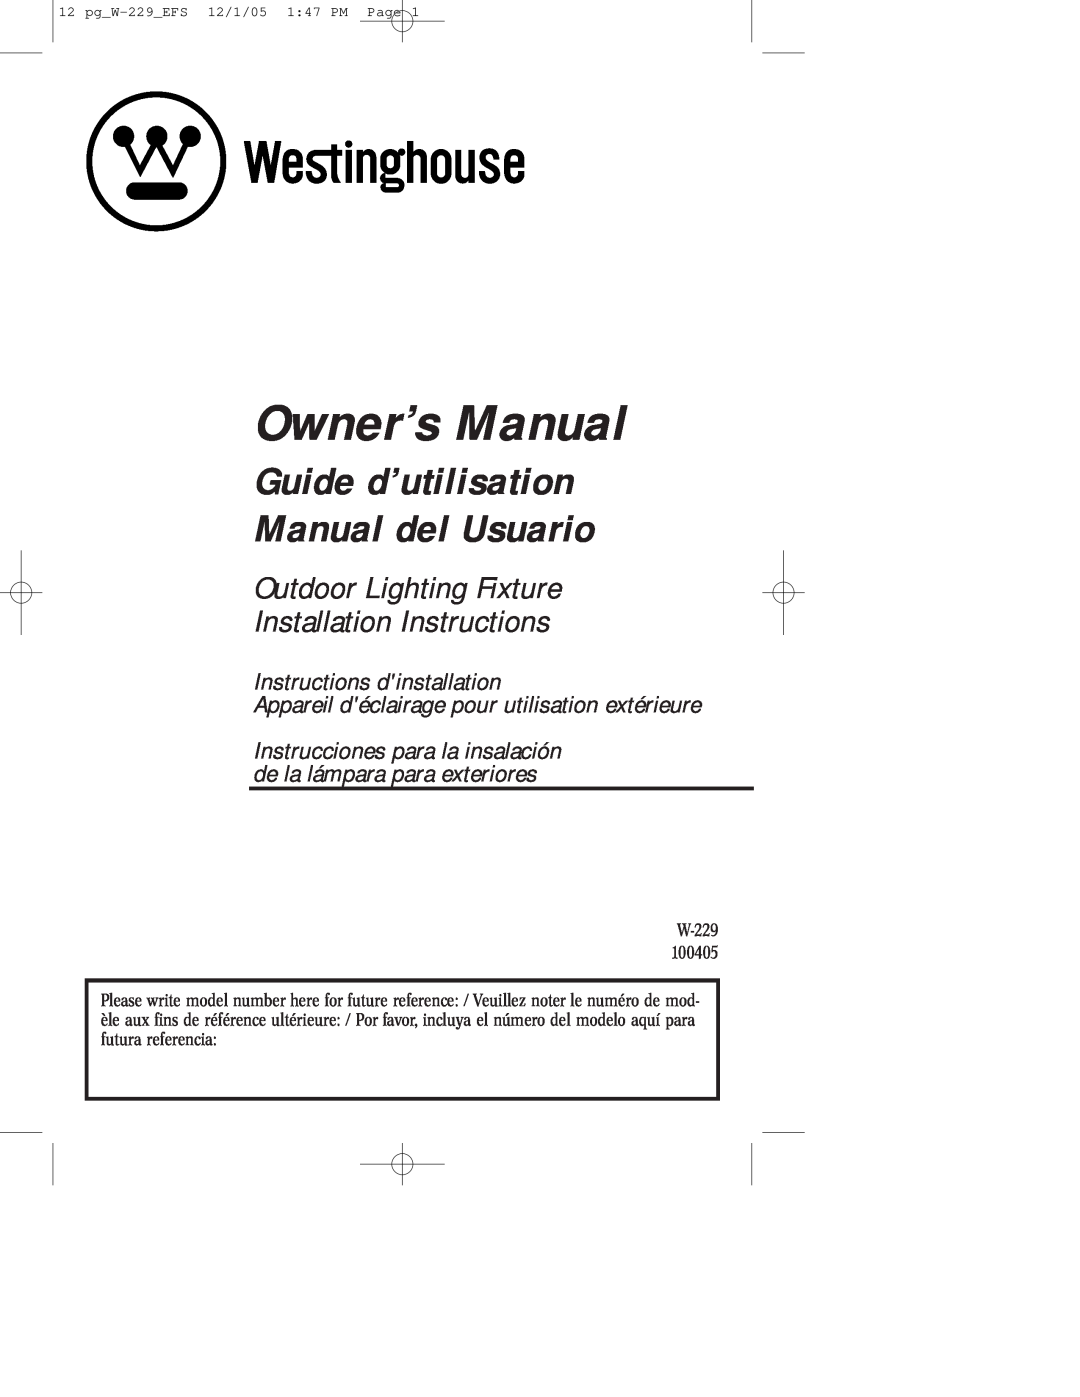 Westinghouse W-229 owner manual Guide d’utilisation Manual del Usuario, Outdoor Lighting Fixture Installation Instructions 